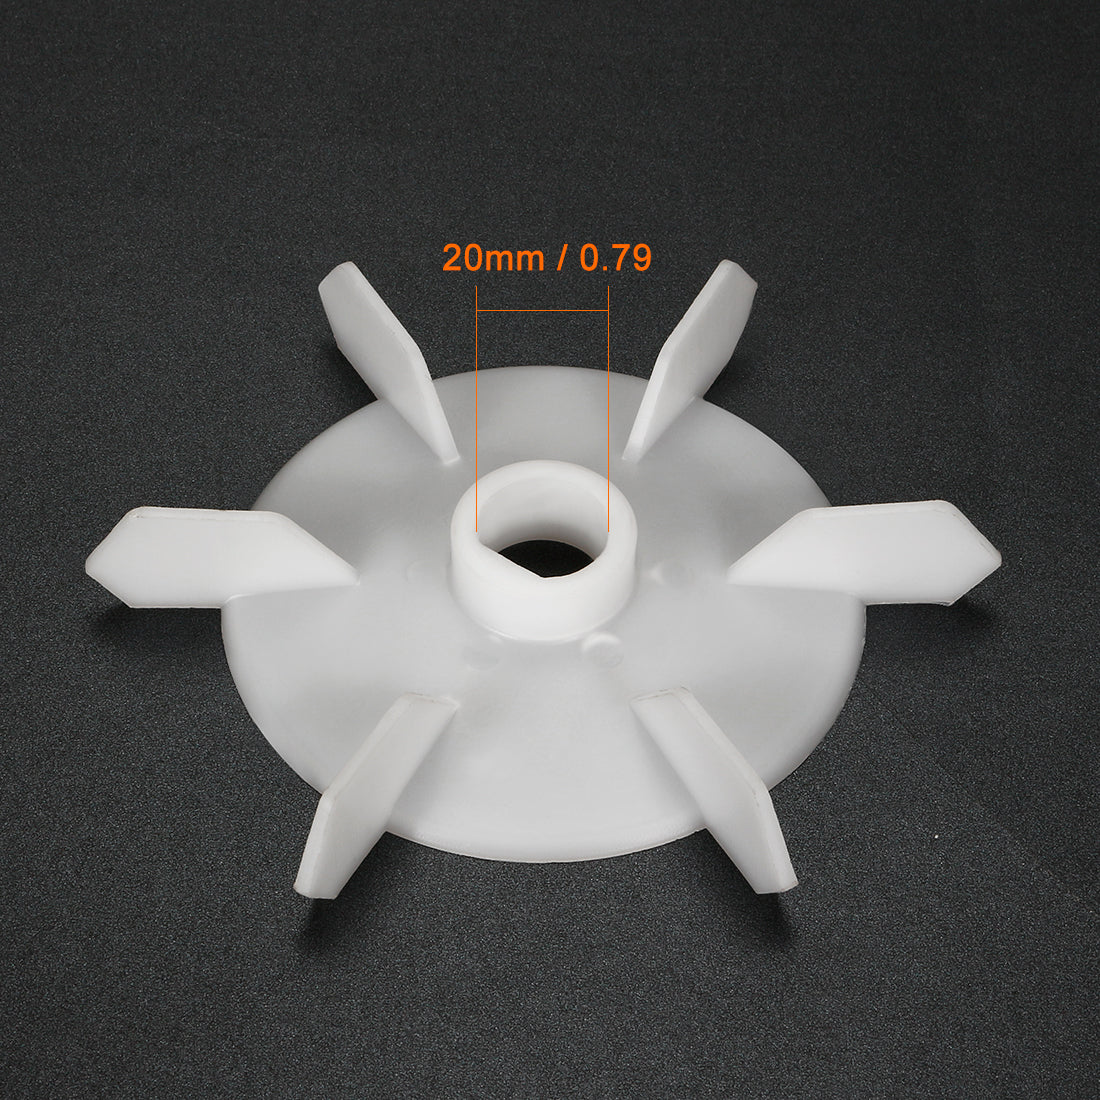 uxcell Uxcell 2Pcs 140*20mm D Shaft Replacement White Plastic 6 Impeller Motor Fan Vane